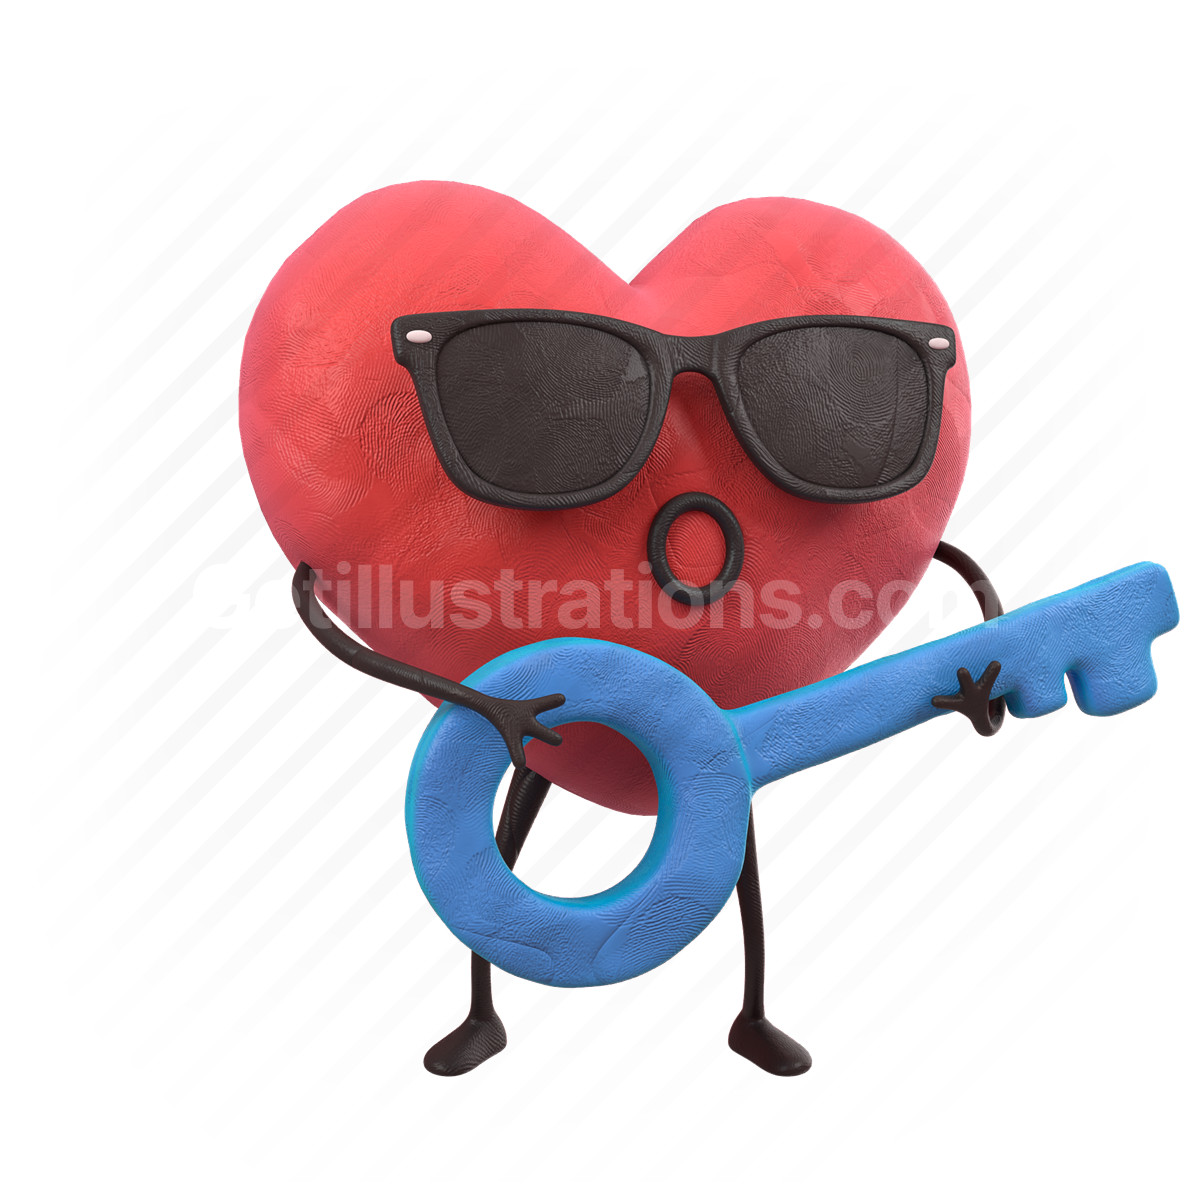 heart, love, romance, romantic, emoticon, emoji, character, key, safety, protection, security